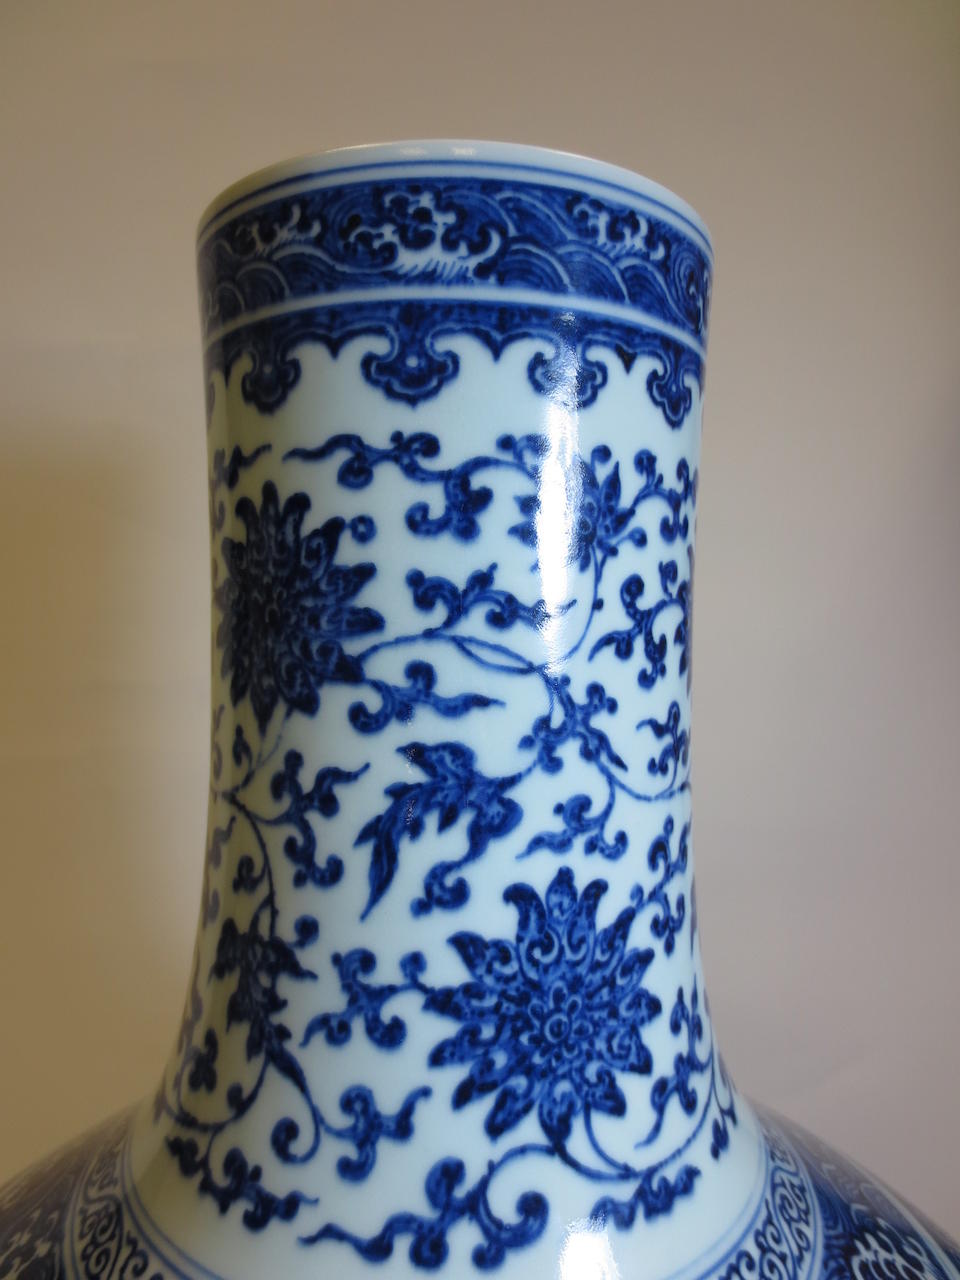 A magnificent blue and white porcelain vase, tianqiuping Yongzheng Mark and period